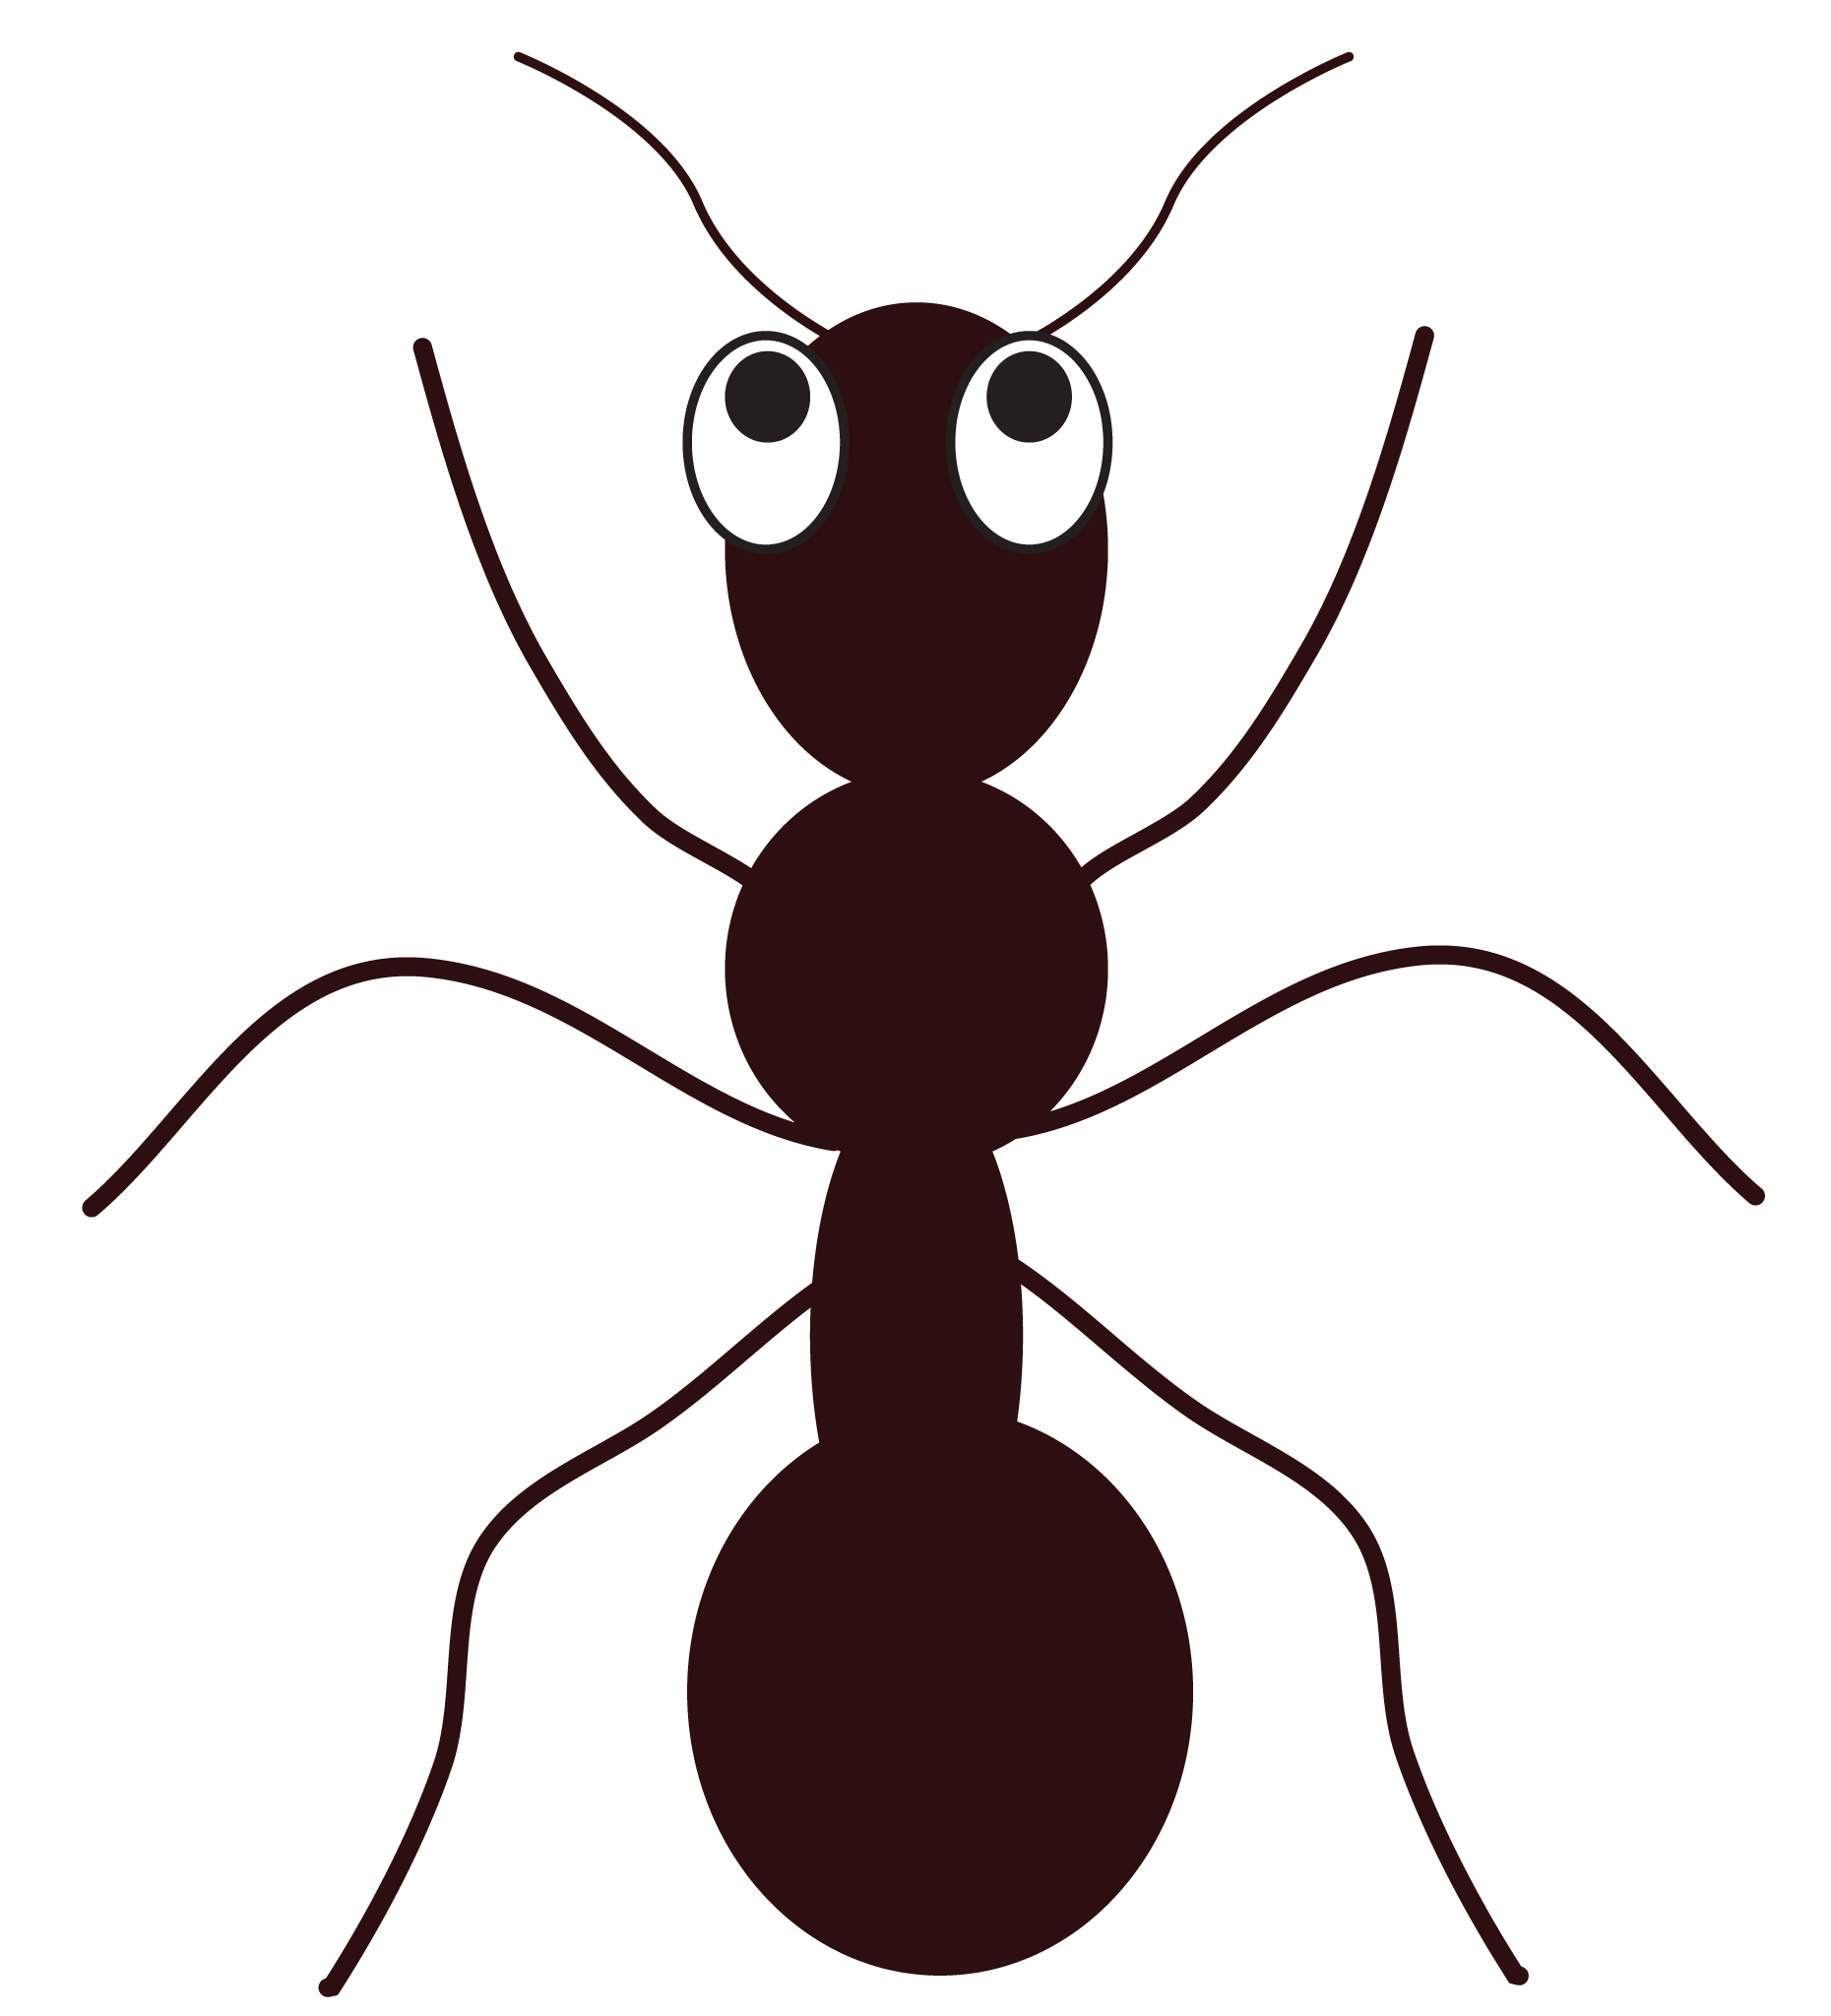 Ant clipart 3